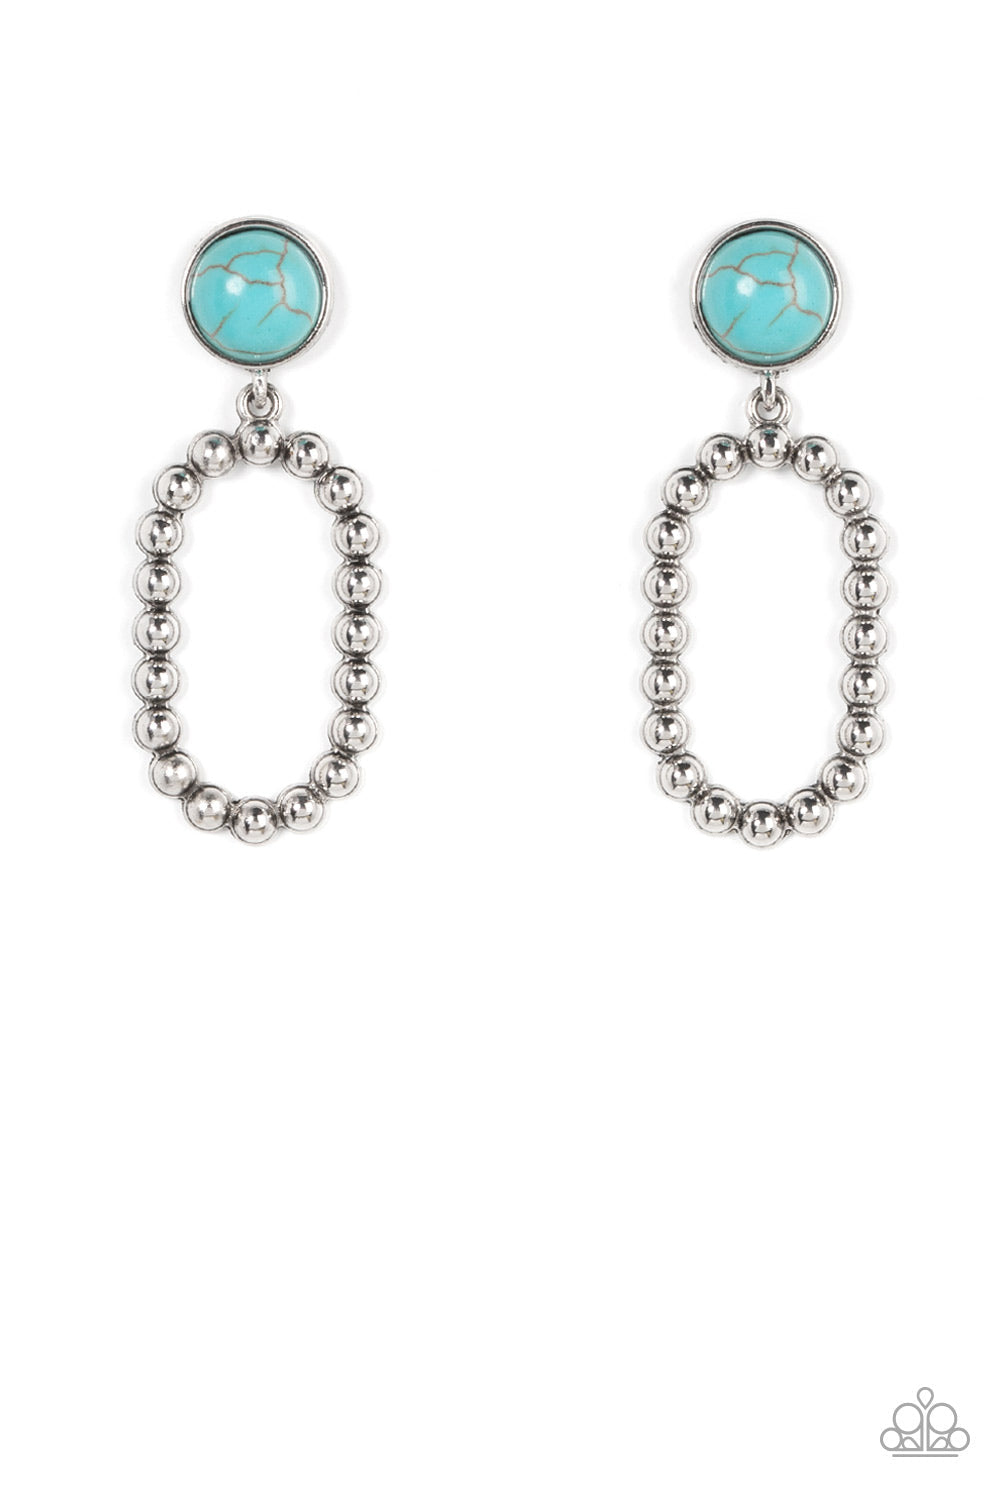 Riverbed Refuge - Blue Turquoise Stone - Silver Earrings - Paparazzi Accessories - a round turquoise stone gives way to a studded oval silver hoop for a rustic flair. Earring attaches to a standard post fitting.